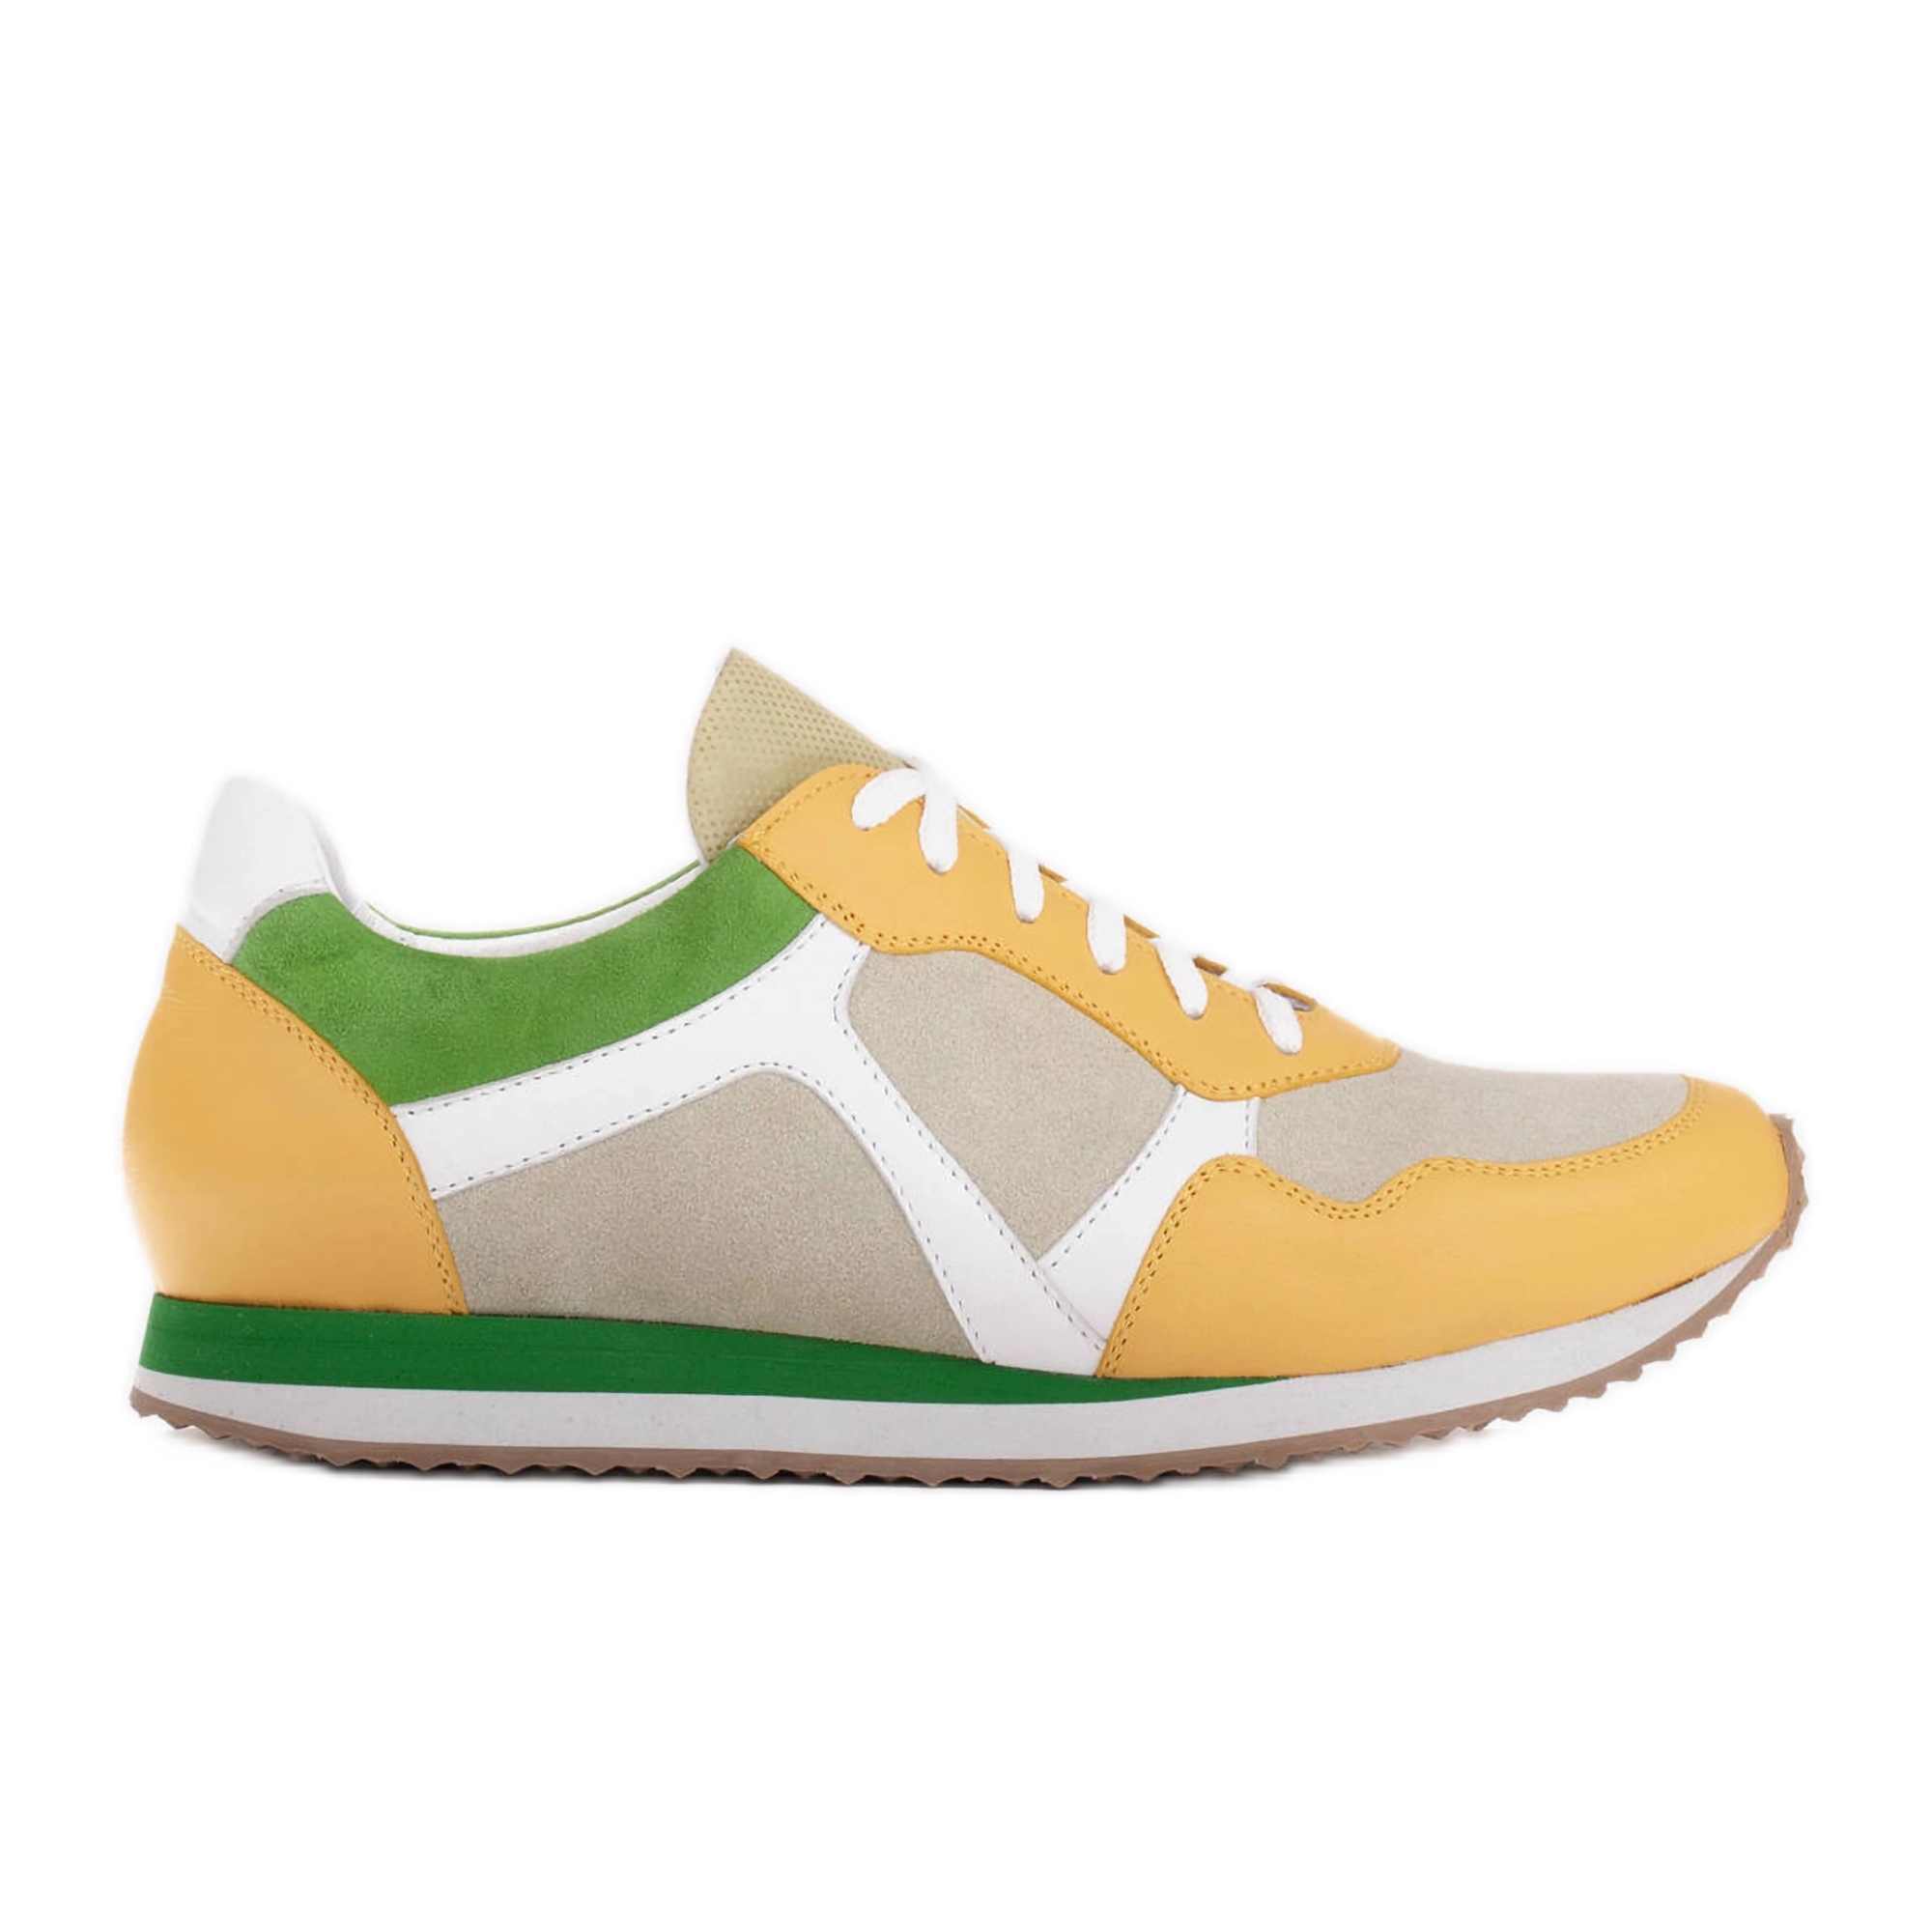 te binden Onbepaald Ongewapend Marco Shoes Sneakers in combination and leather and suede beige - KeeShoes